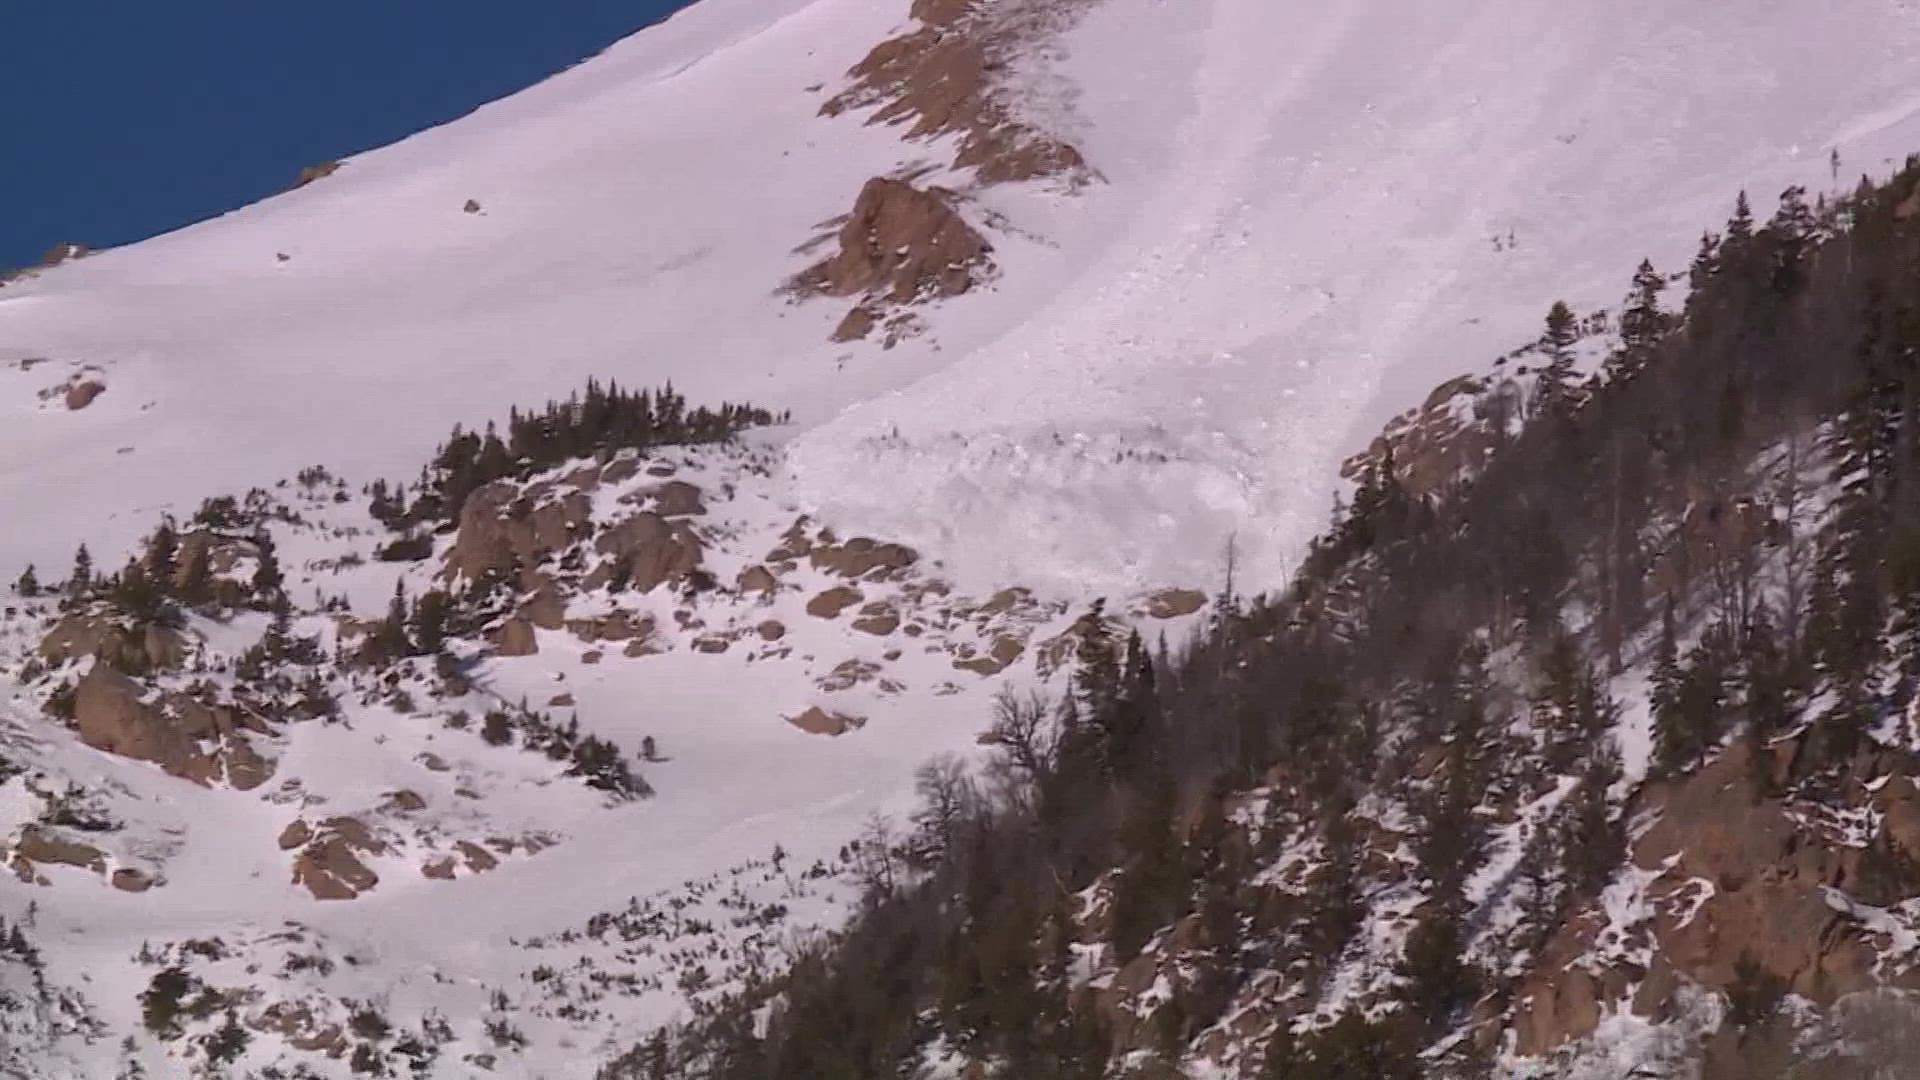 Avalanche danger conditions are expected to improve just in time for the weekend. 9NEWS Meteorologist Cory Reppenhagen explains the conditions.